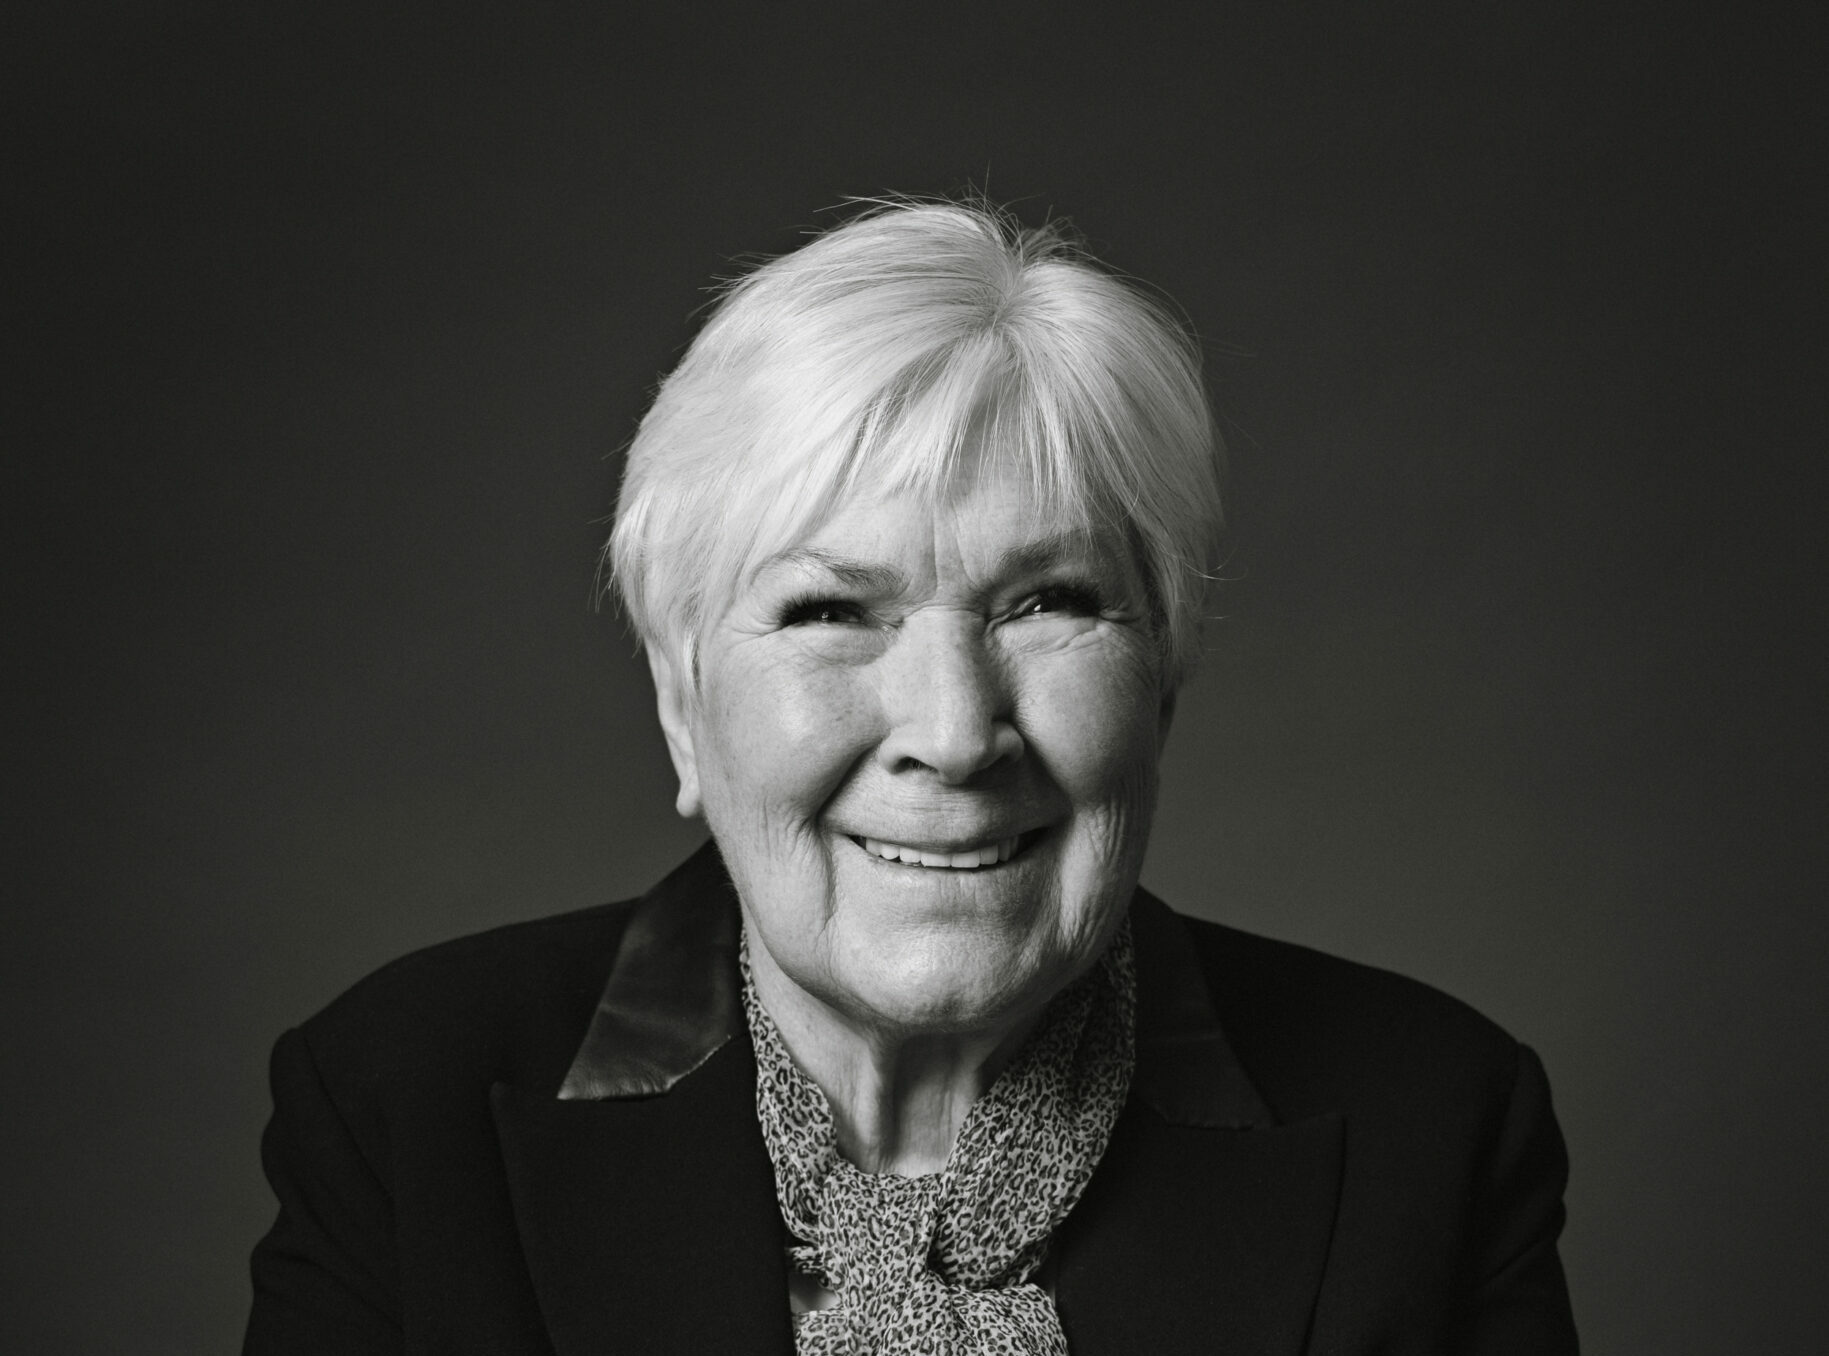 Gail Miller’s name—and her far-reaching legacy as an astute businesswoman and leading philanthropist—proceeds her.